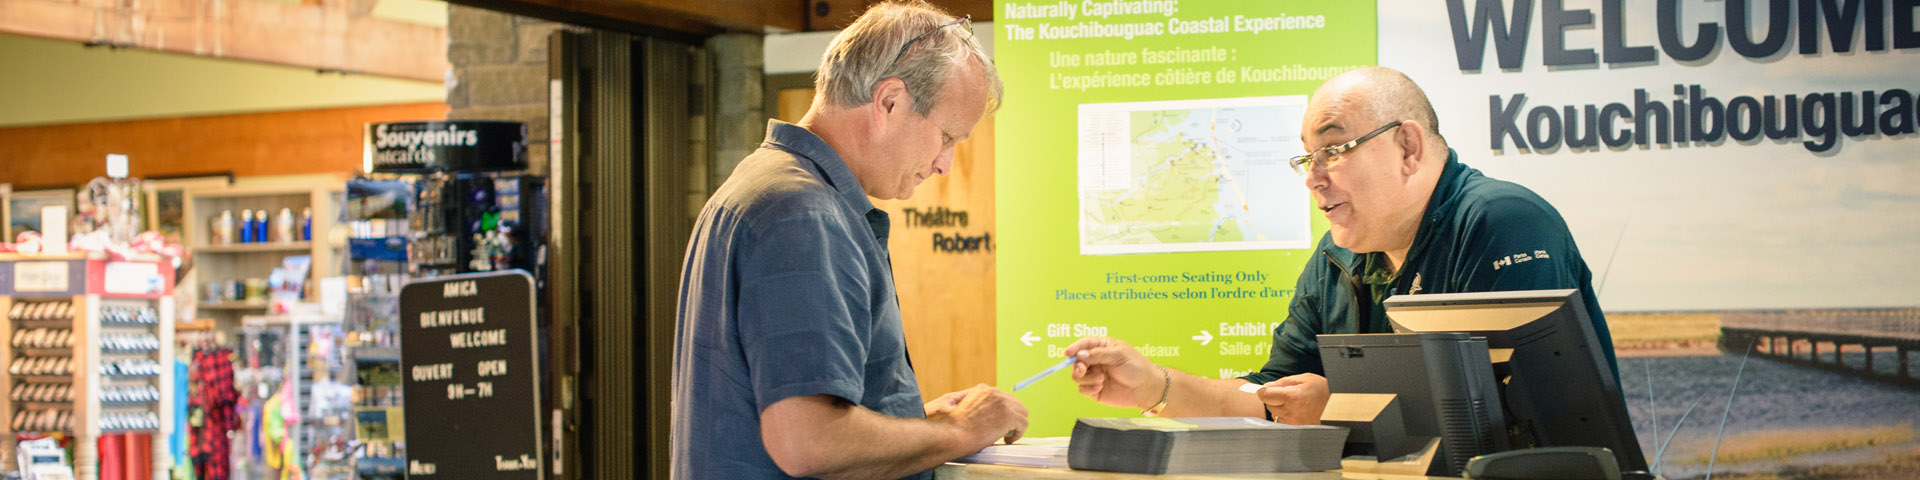 A Parks Canada staff member talks to a visitor at the reception desk